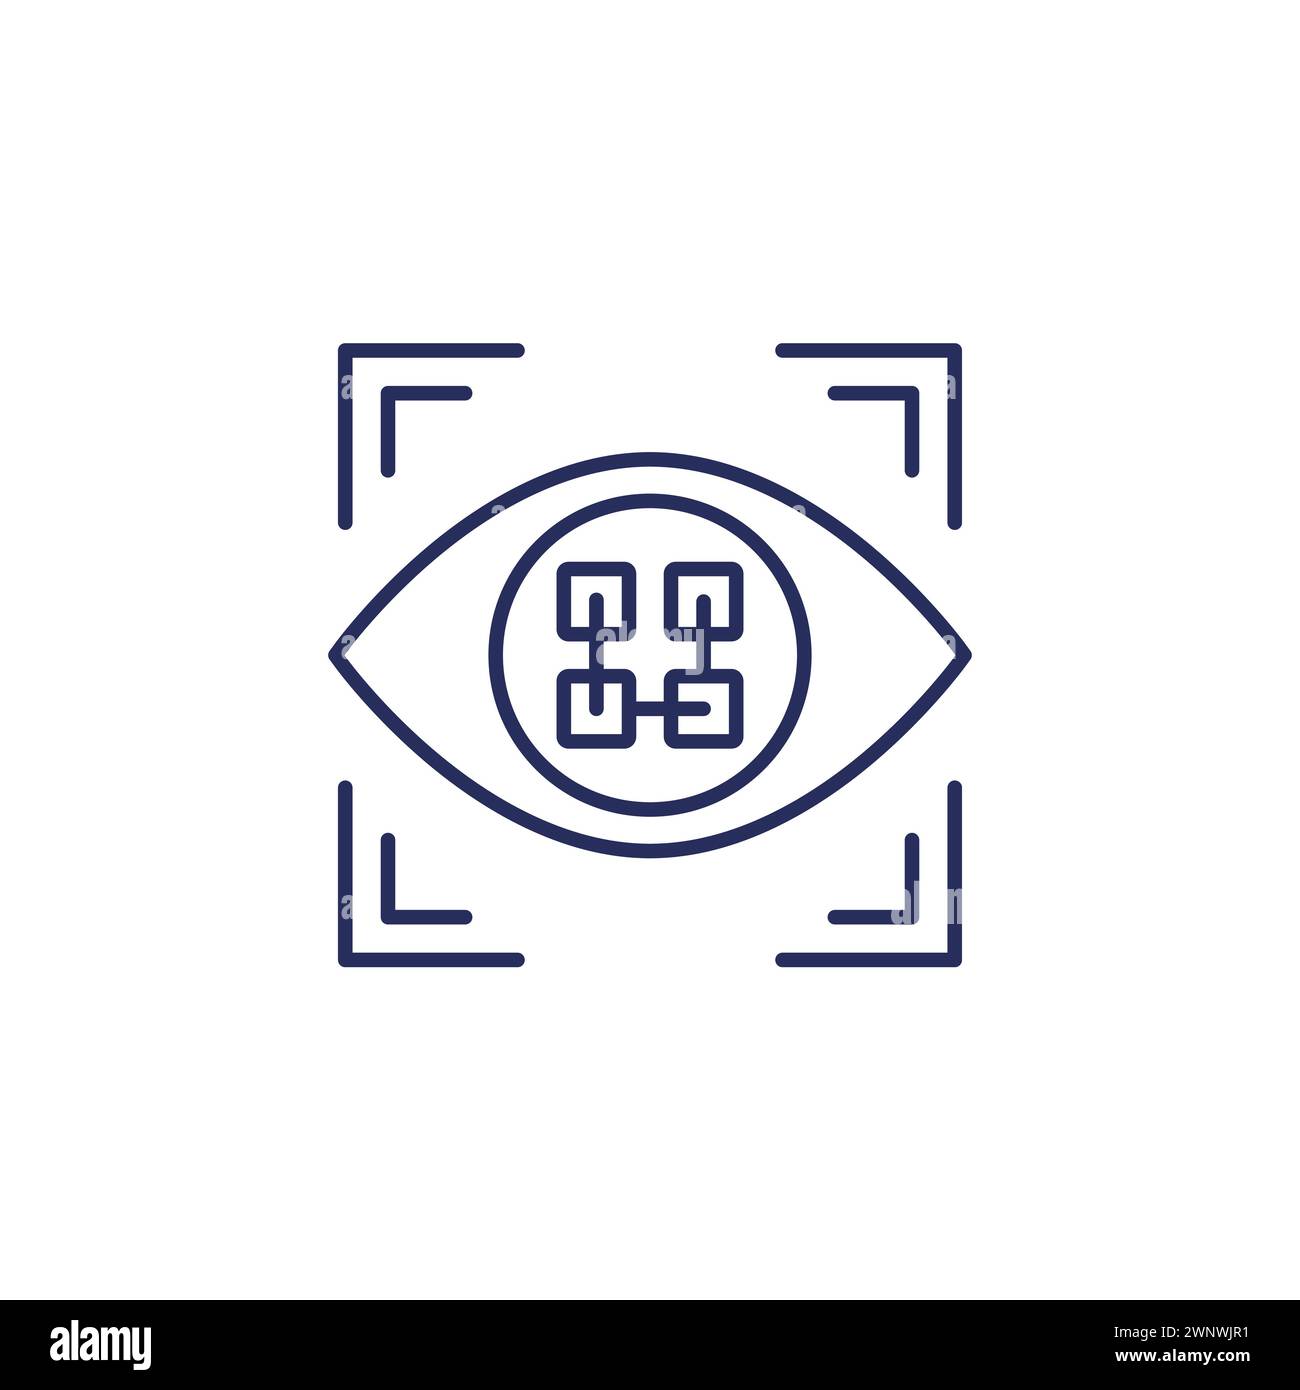 pattern recognition line icon with an eye Stock Vector